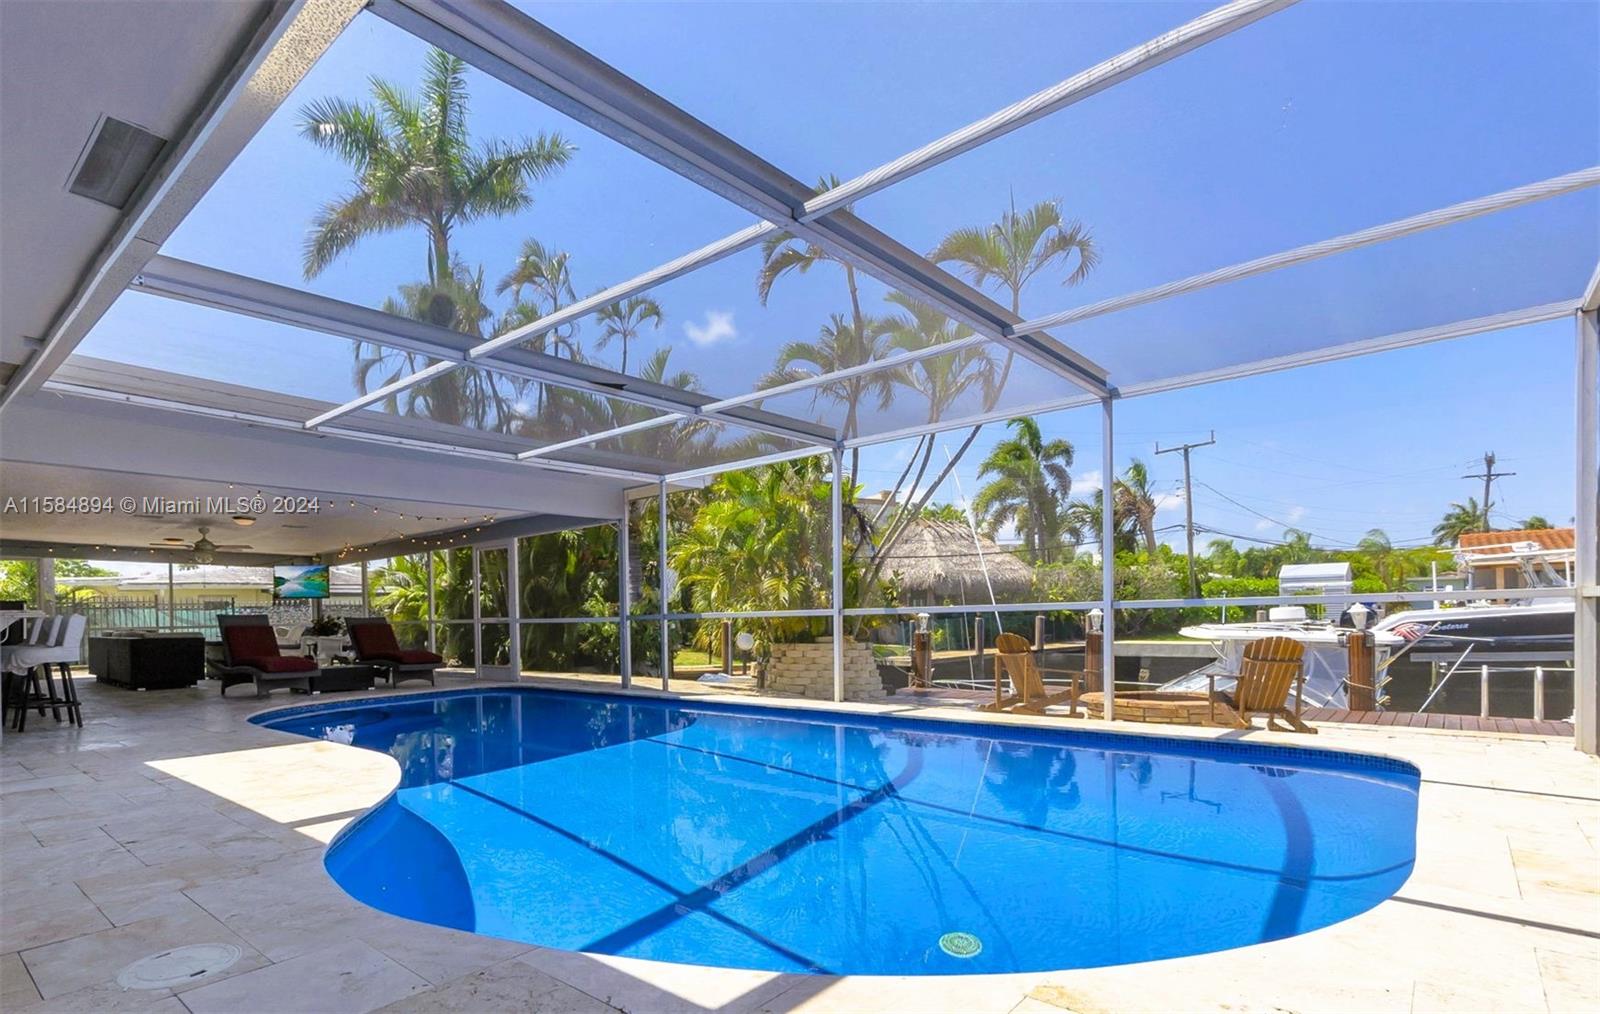 South Florida living at its finest with this stunning 3 bed 3 bath pool homel with 75' dock and direct ocean access(no fixed bridges). On an oversized lot this one of a kind home features a 20x60 enclosed lanai and a remote heated and salt system/screened in pool just steps away from your boat on the water. Perfect for entertaining and the ultimate in indoor/outdoor living, it also features luxurious travertine pavers, bistro lighting, wood burning fire pit, hot tub, heated outdoor shower, impact windows and doors, circular pavered driveway, air conditioned oversized garage and a whole house generator. Dock has water and electric(110 and 220) and wave runner lift. Great neighbors and walking distance to 4 restaurants, church and grocery store 1/4 mile away.